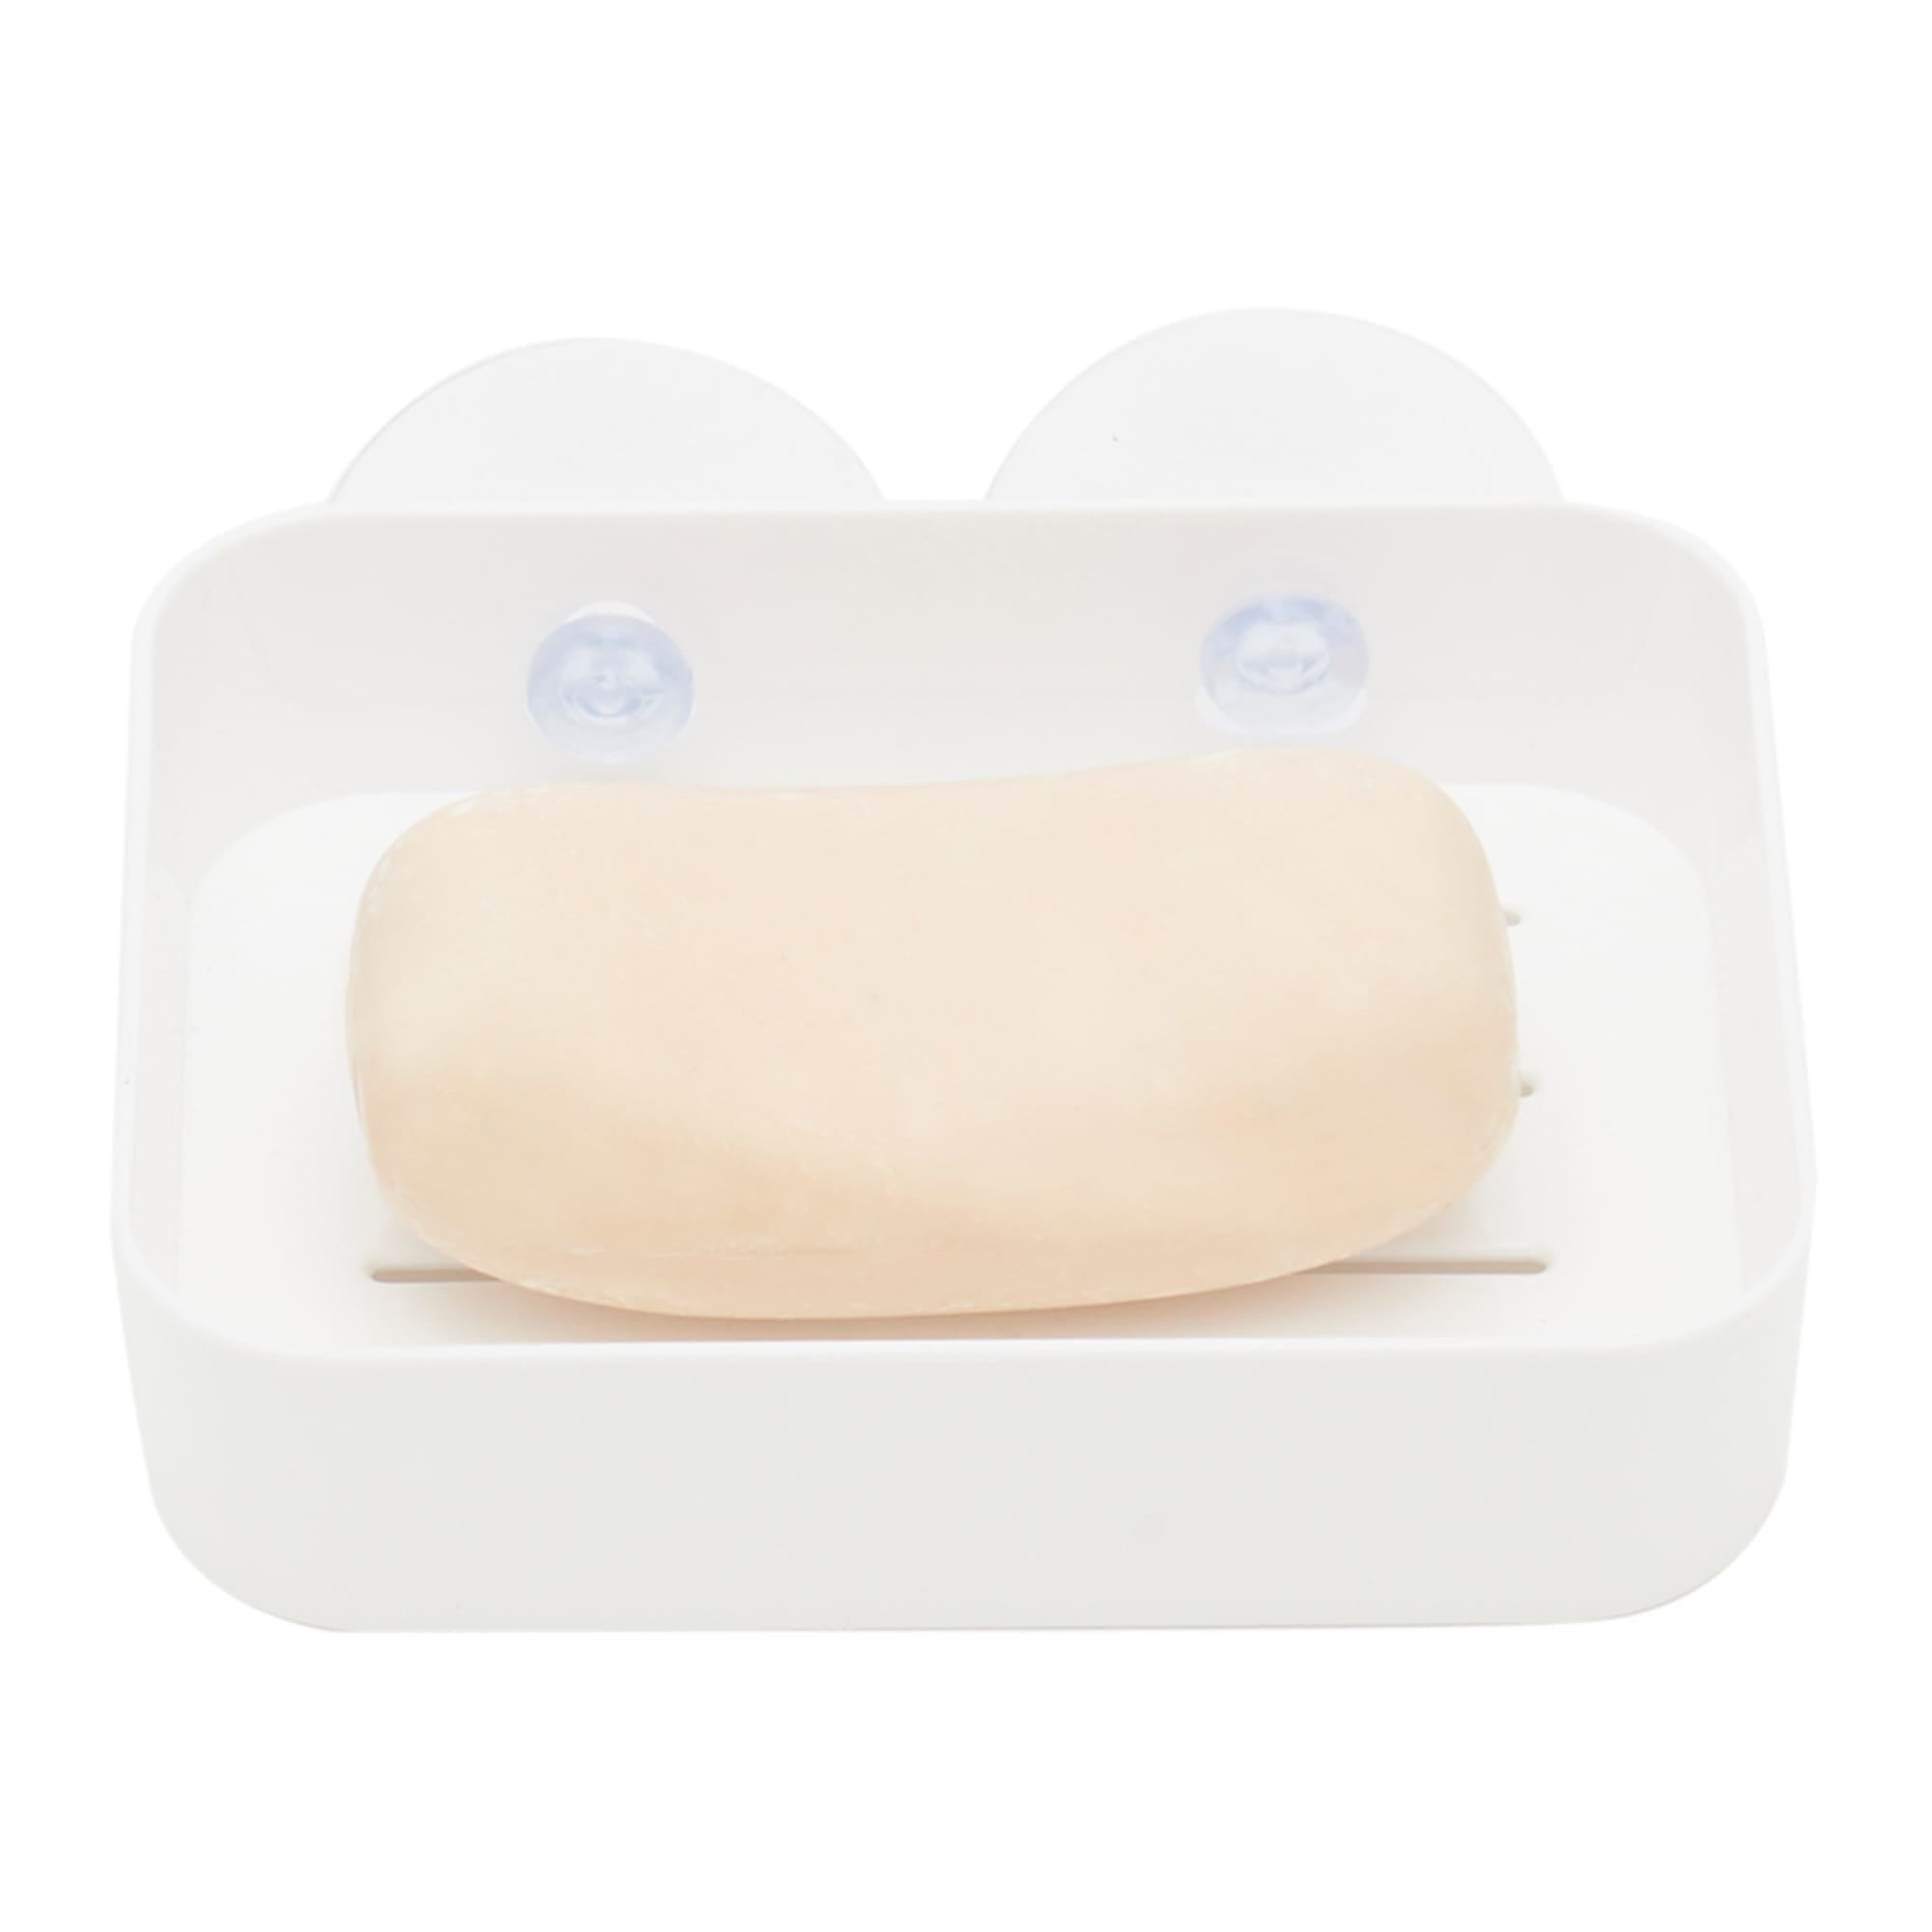 Home Basics Serenity Soap Dish with Suction $1.25 EACH, CASE PACK OF 24